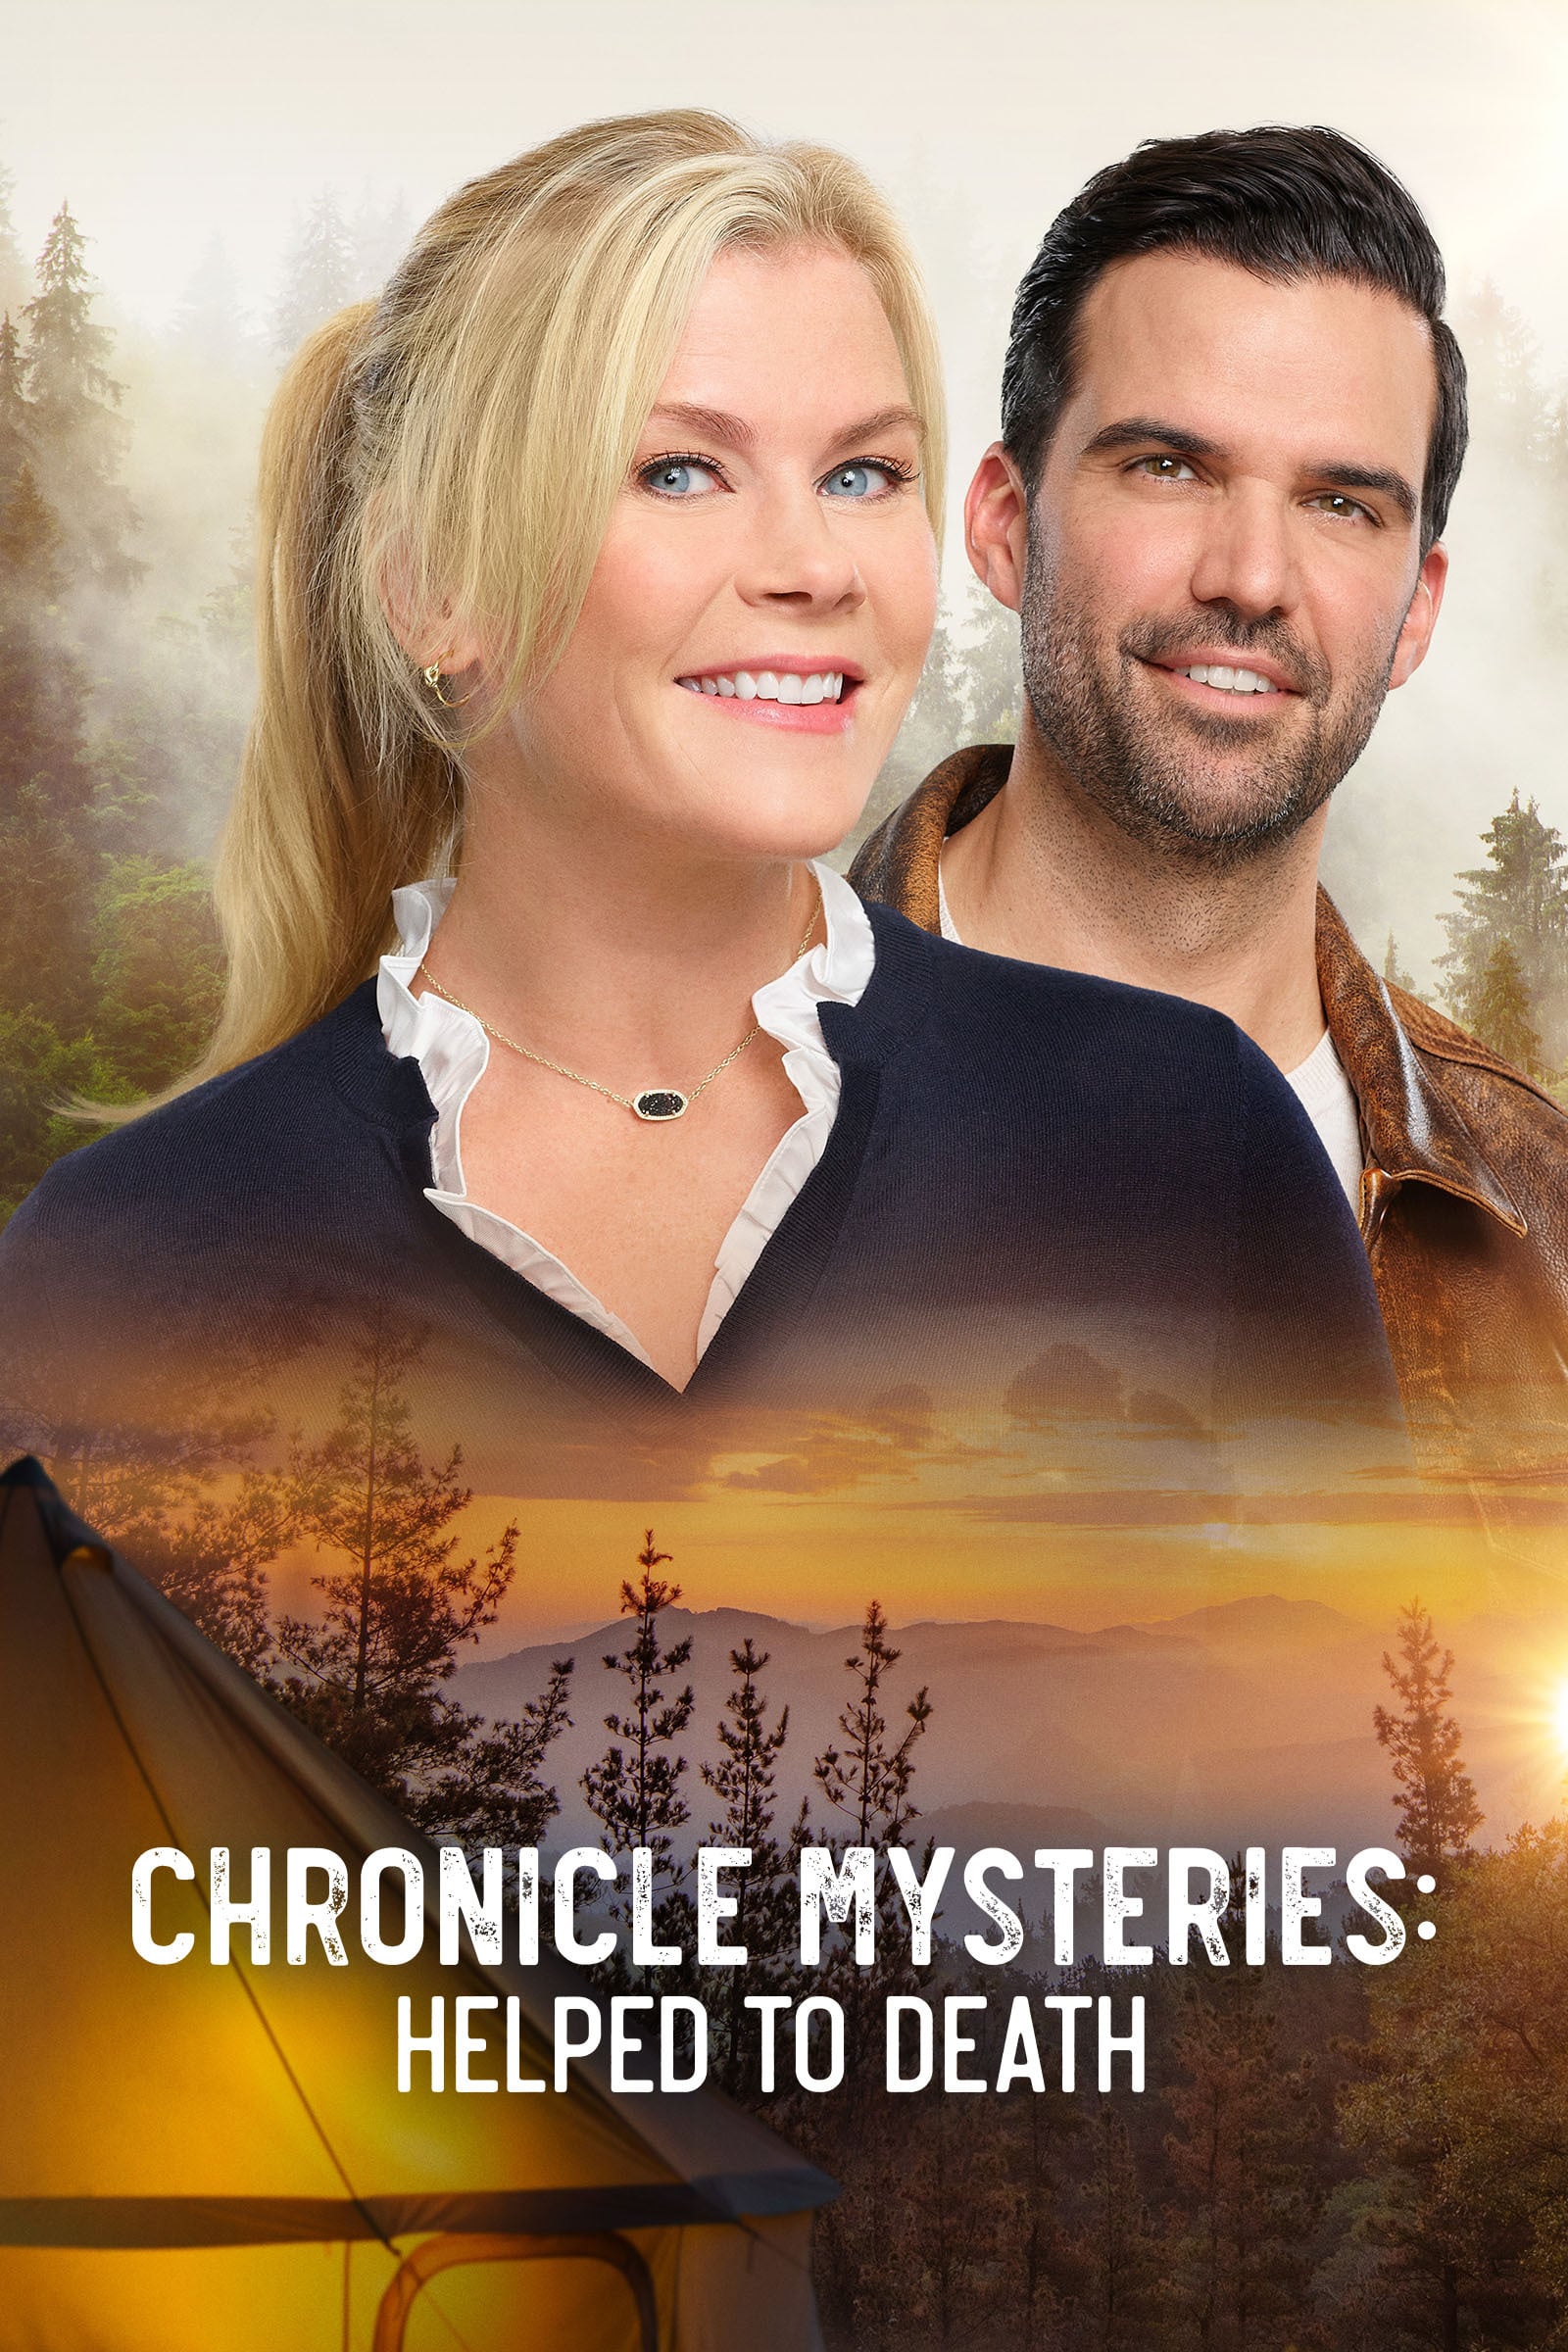 Chronicle Mysteries: Helped to Death film